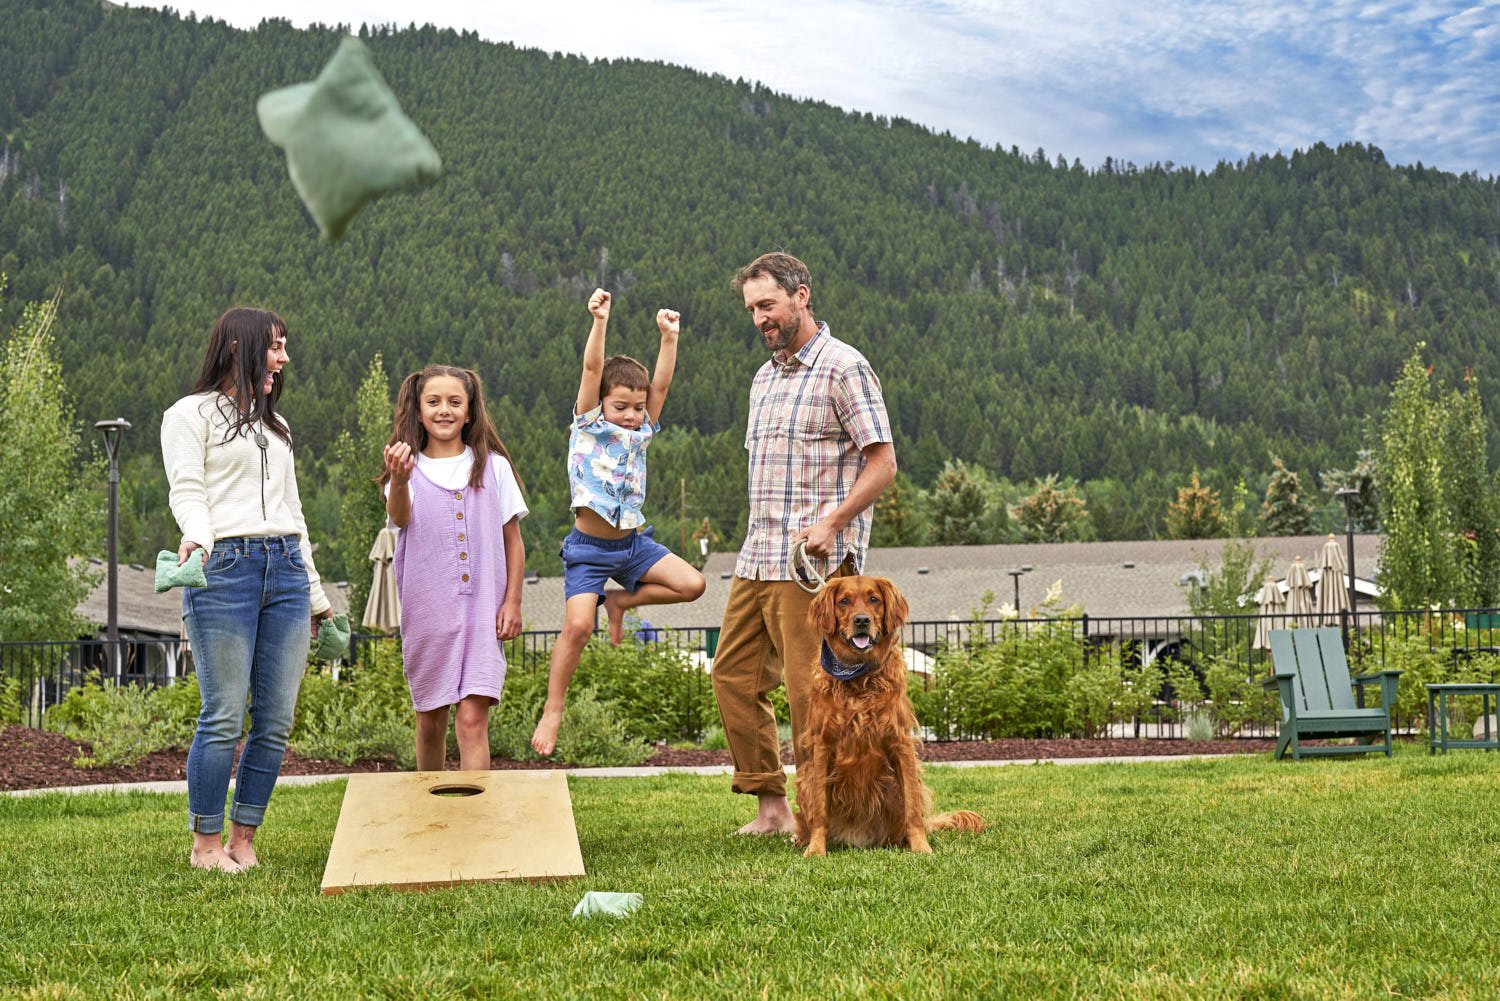 Knoxy_Knox_Lifestyle Photographer_Outbound Hotels_Summer_Mixed Race Family_Hotel_Lawn_Games_Mountains_Jackson_Wyoming_5665.jpg